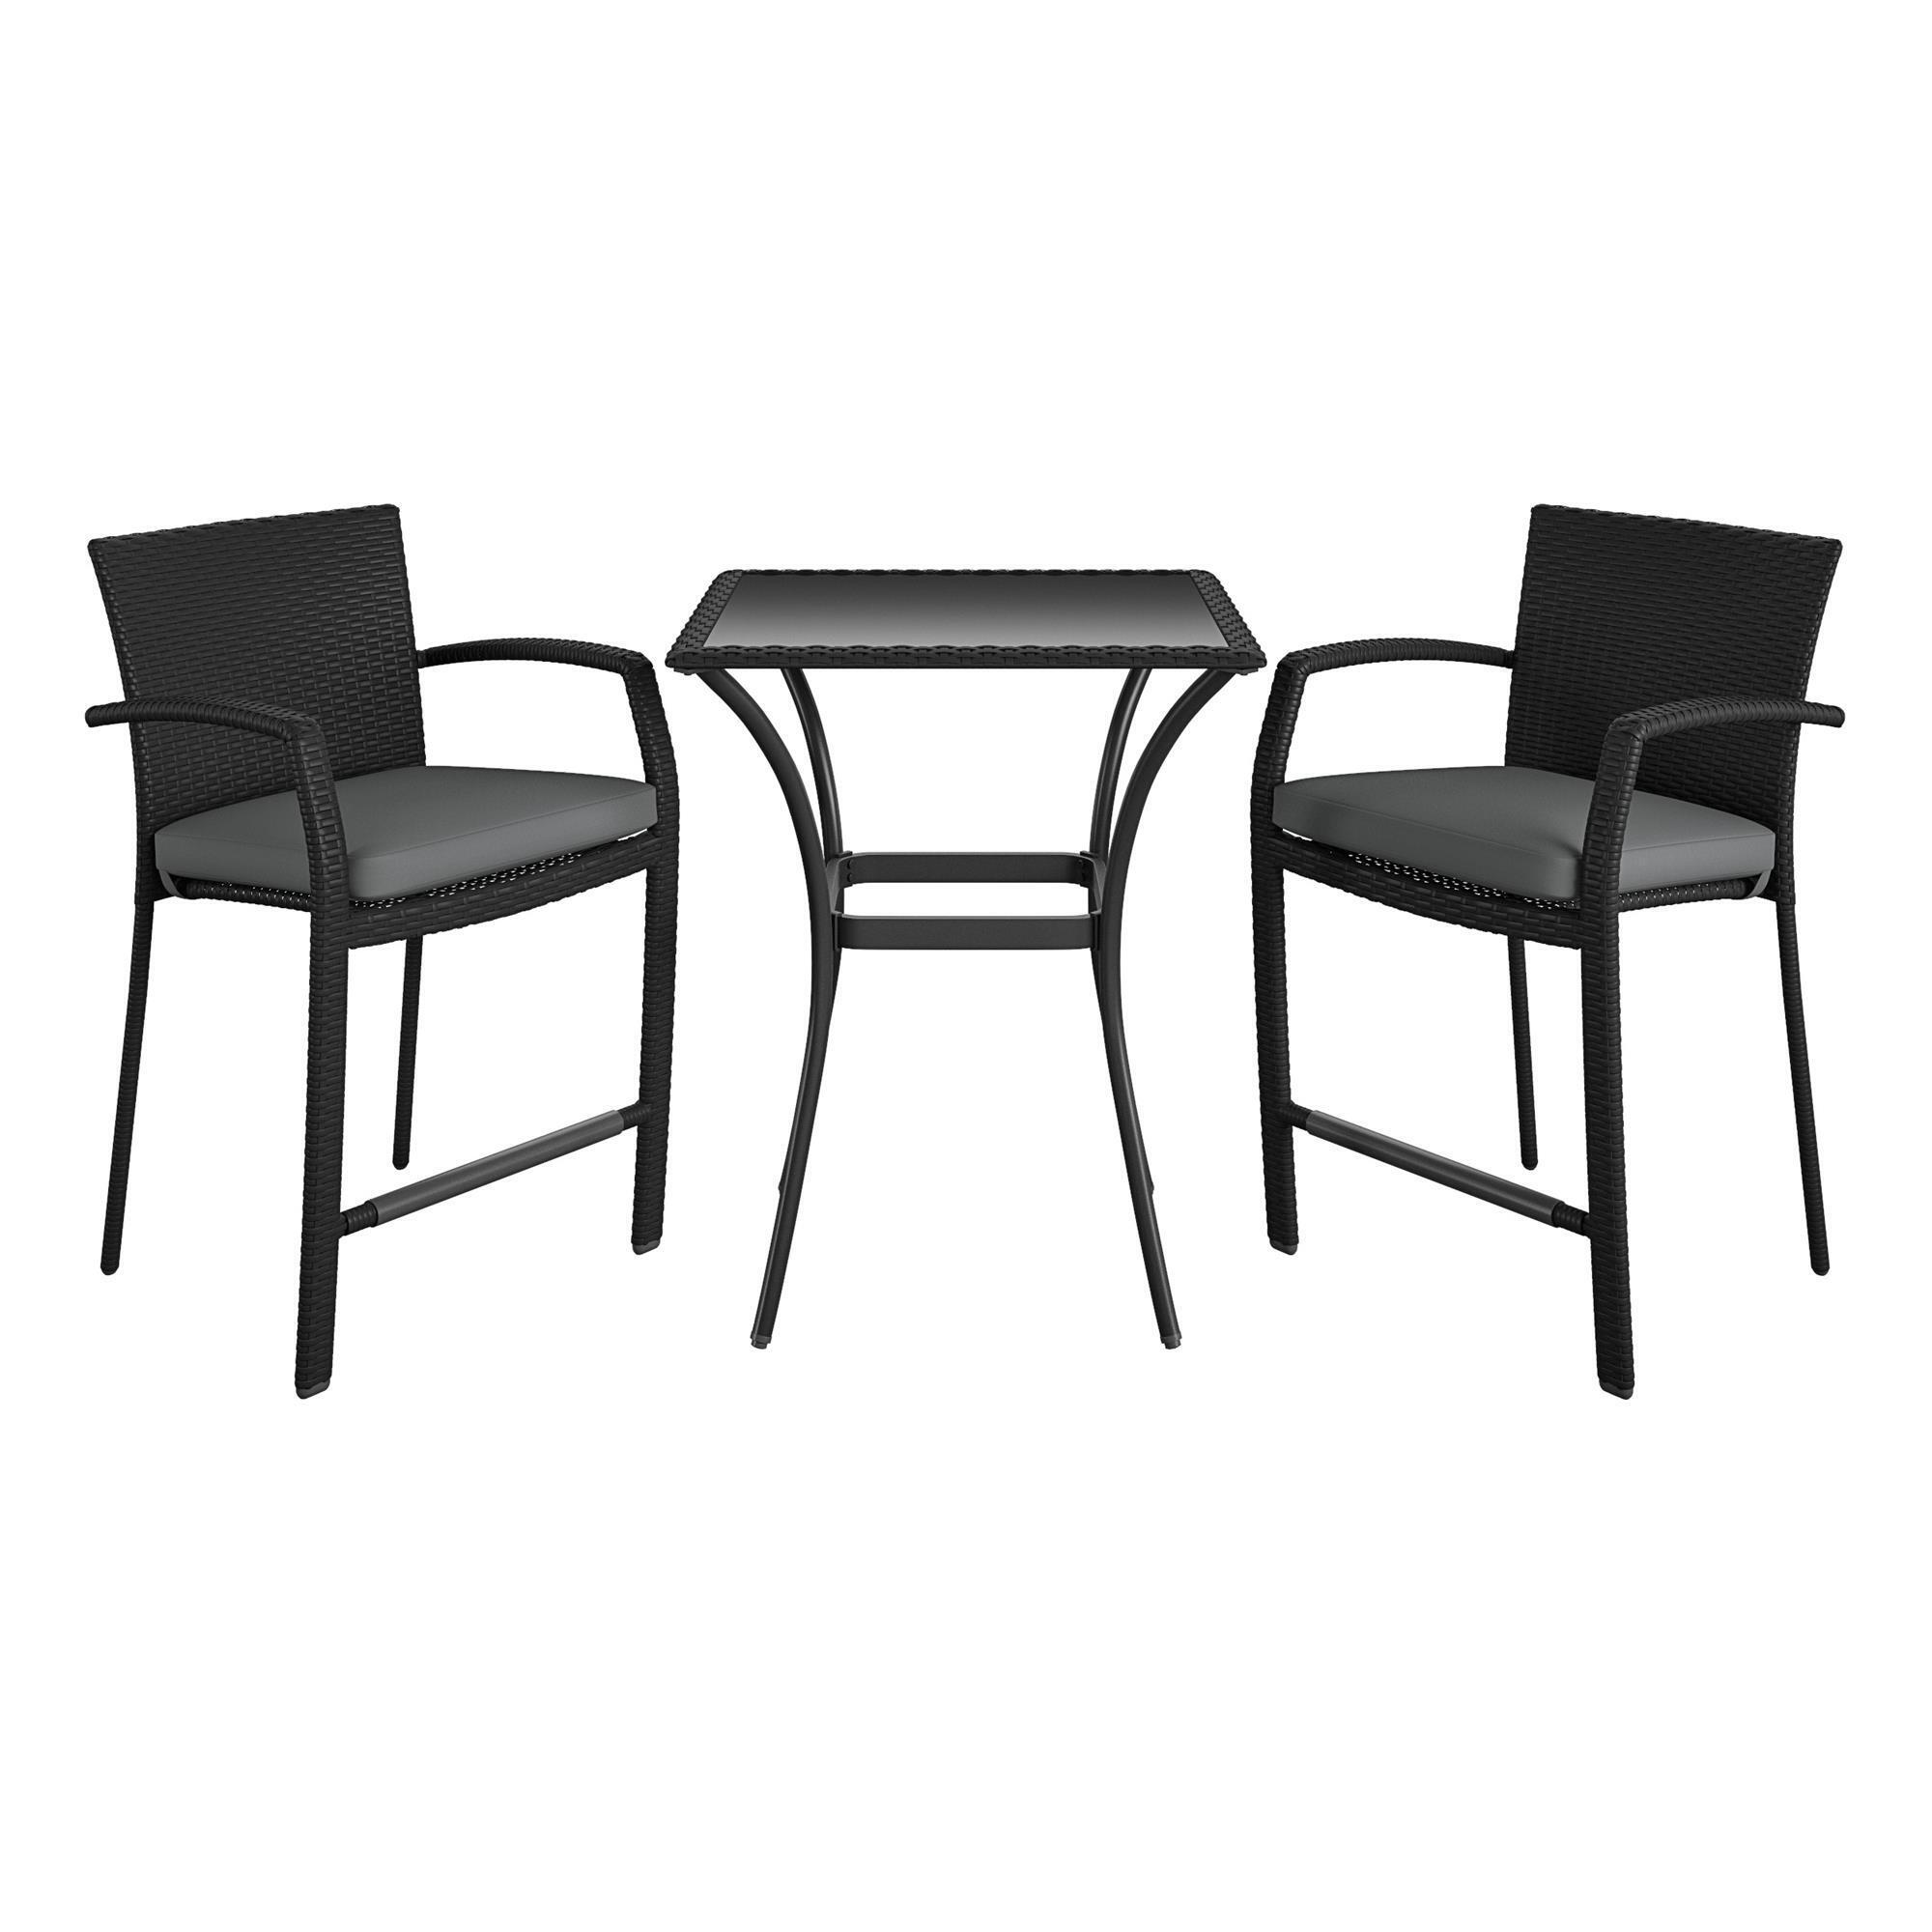 Cosco Outdoor Living, 3 Piece High Top Bistro Patio Furniture Set, Pieces (qty.) 3, Primary Color Black, Seating Capacity 2, Model 88594BGY1E